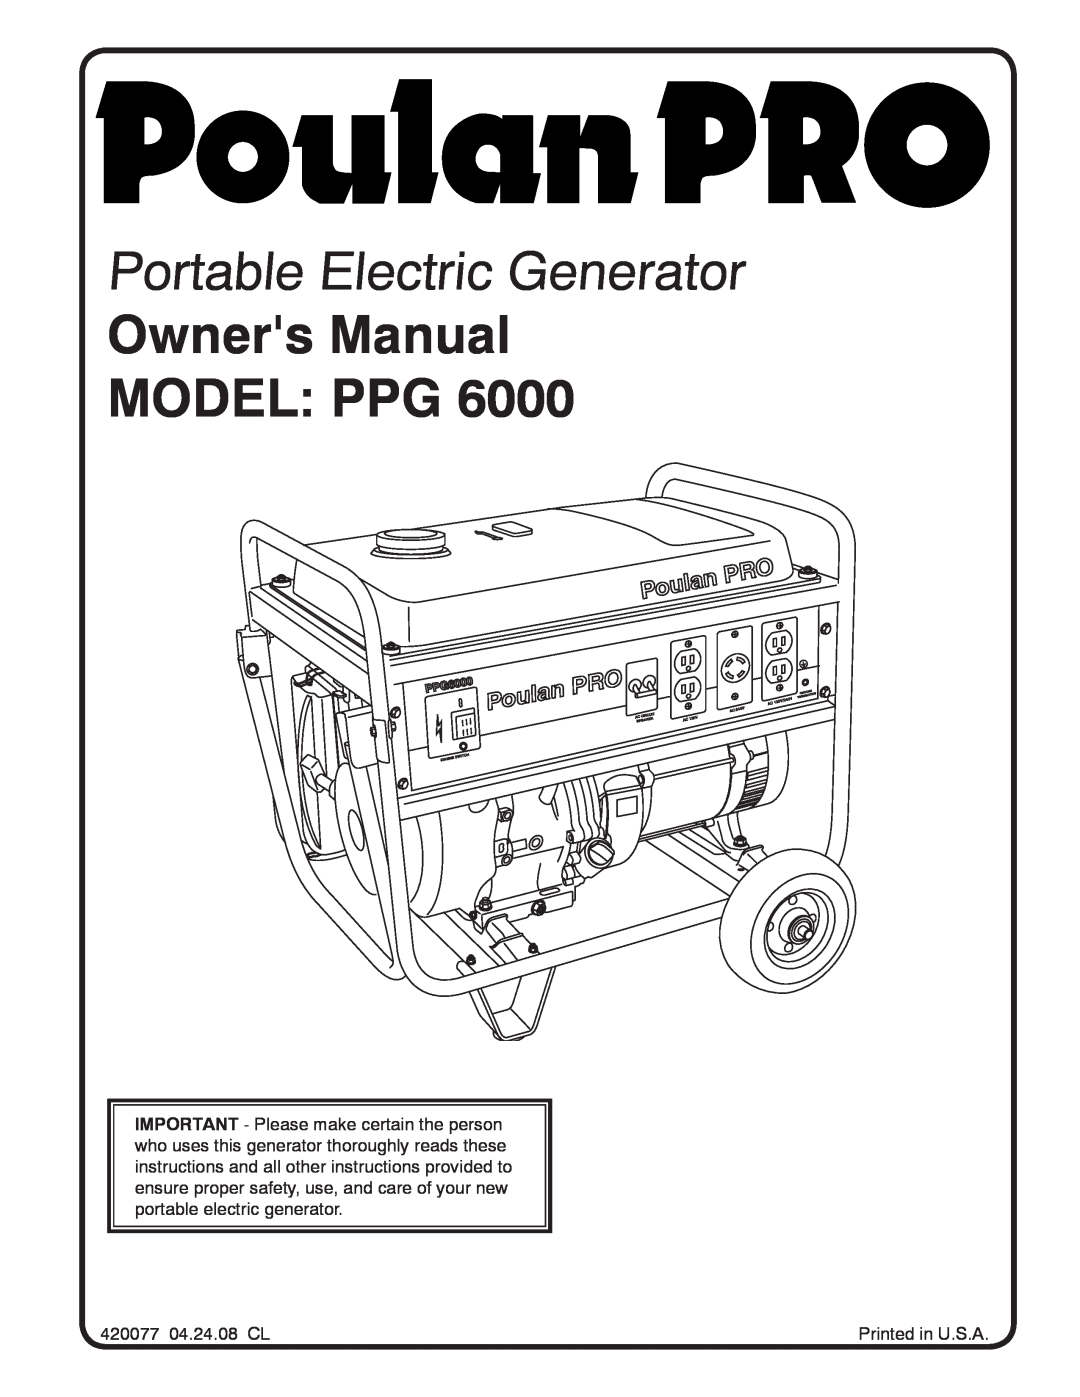 Poulan 420077 owner manual Portable Electric Generator, Owners Manual MODEL PPG 